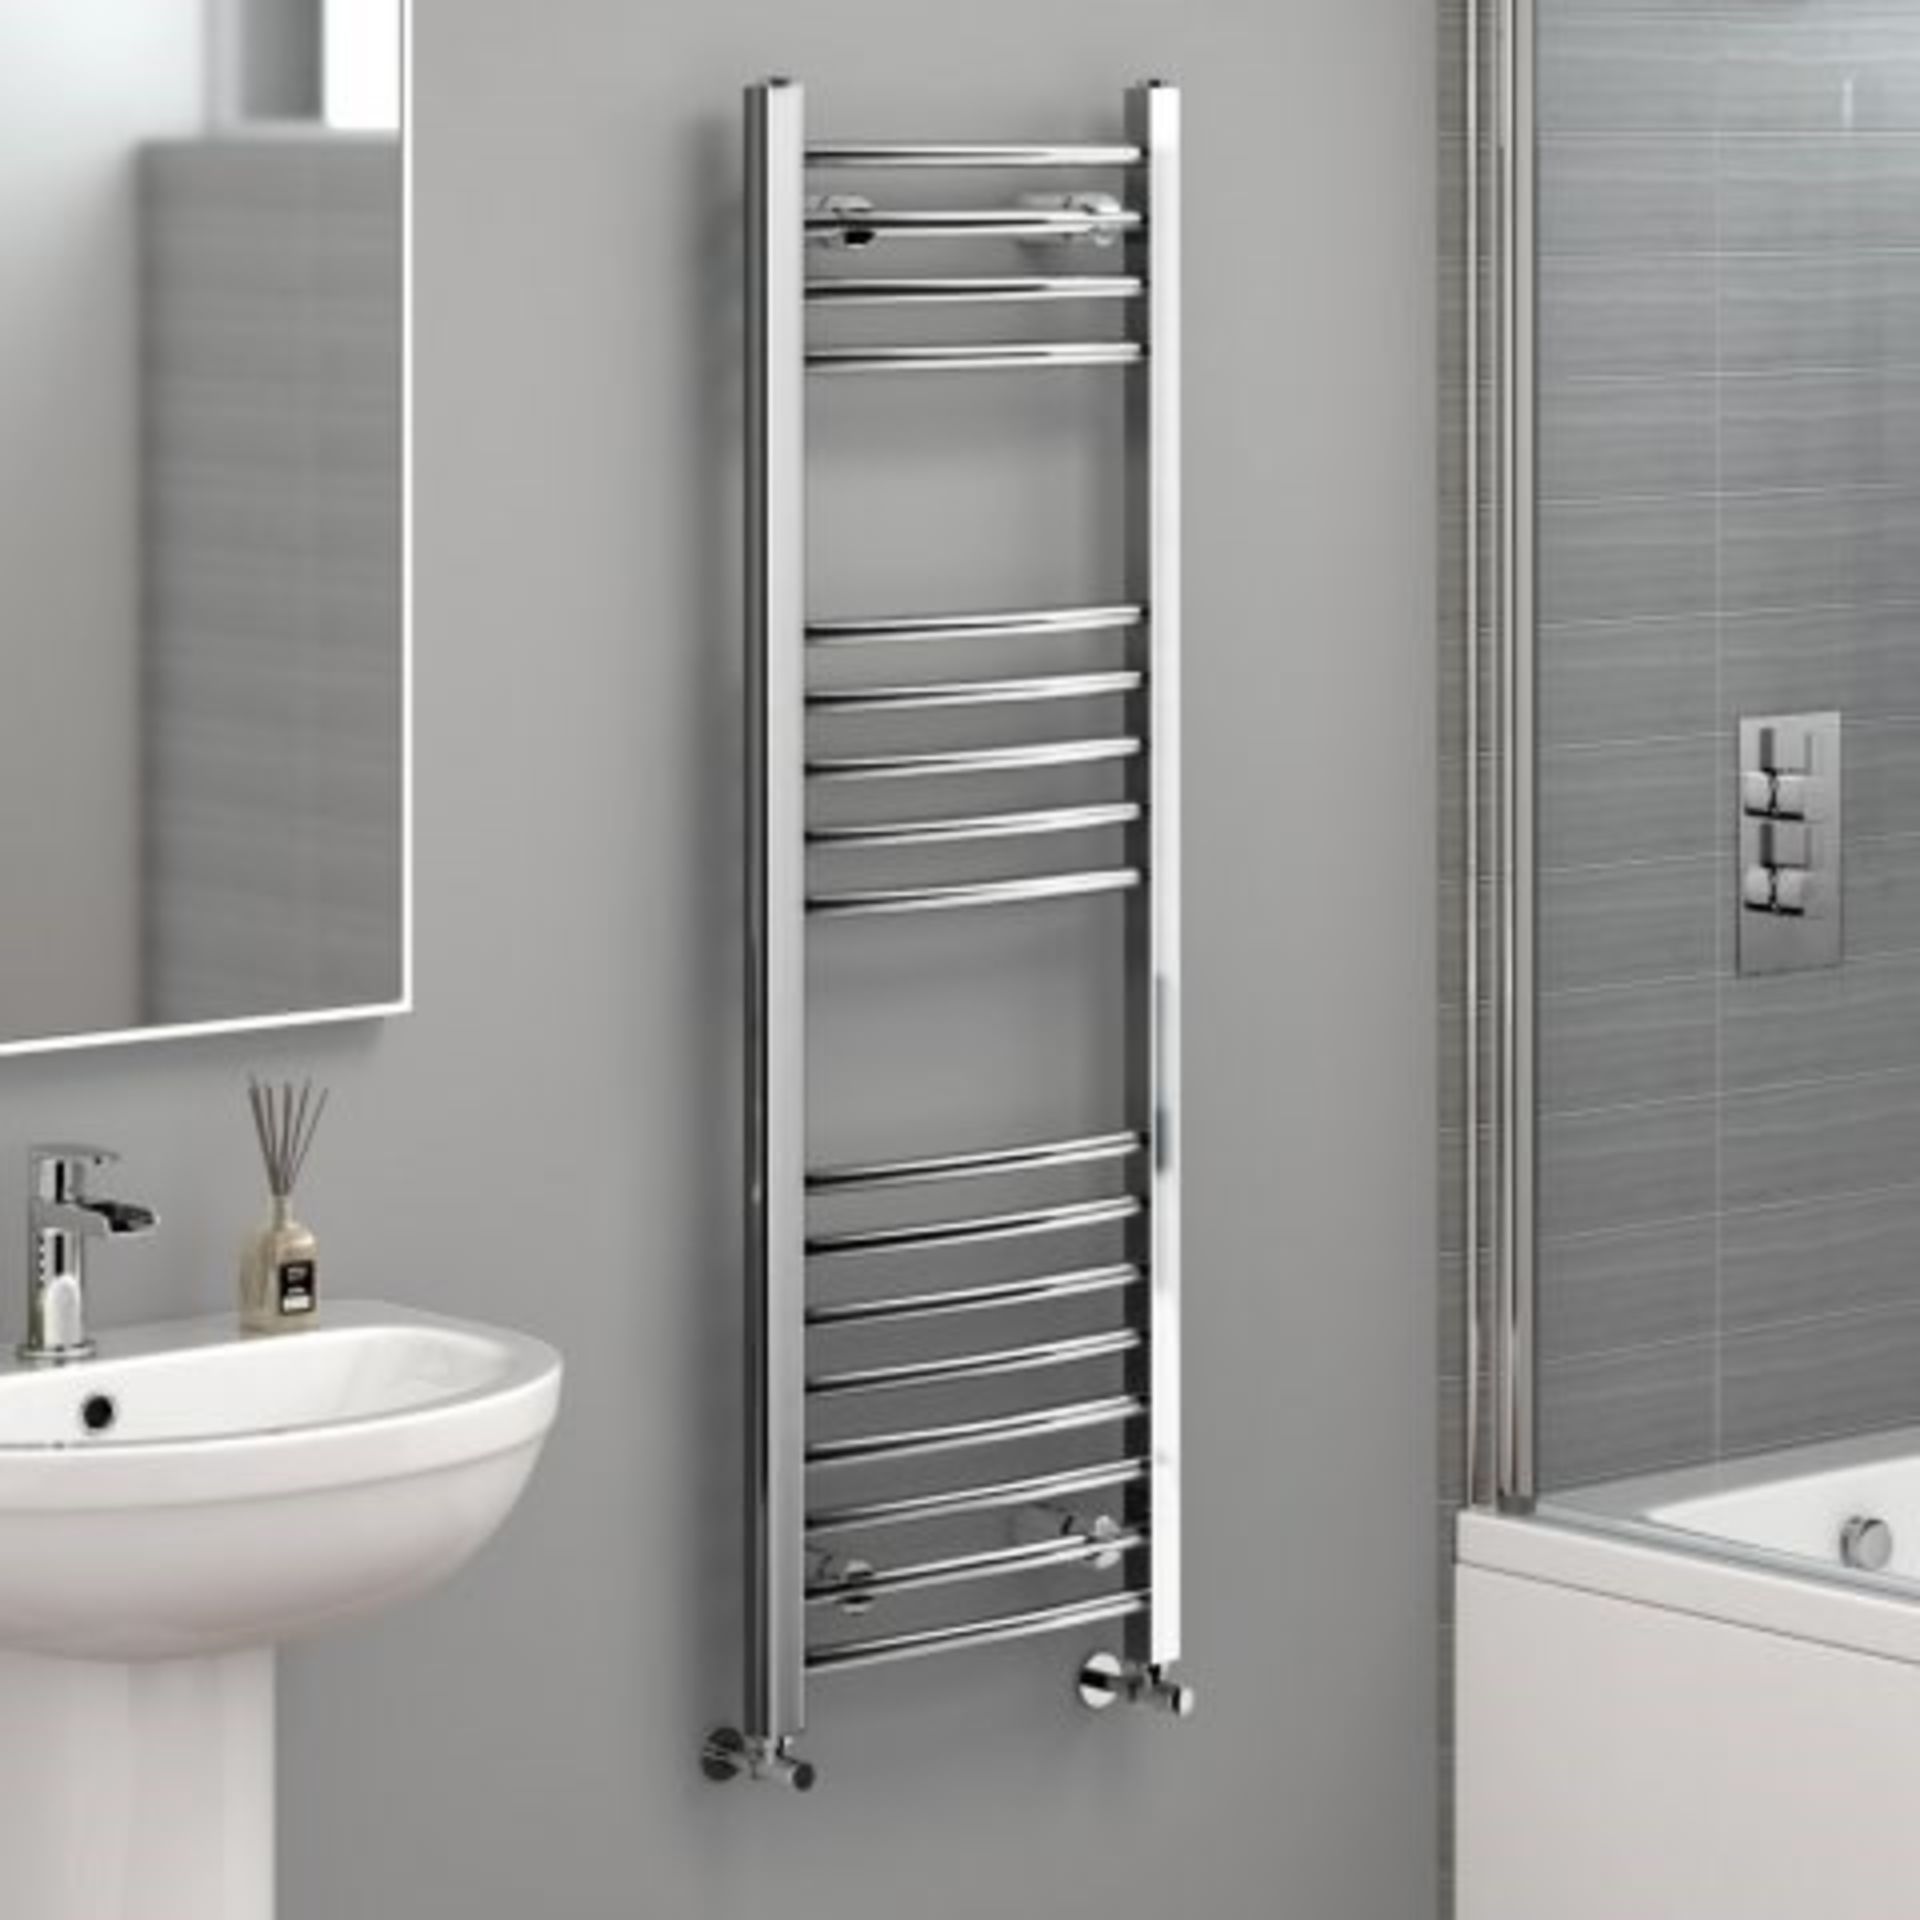 NEW & BOXED 1200x400mm - 20mm Tubes - Chrome Curved Rail Ladder Towel Radiator. NC1200400.Our N... - Image 3 of 3